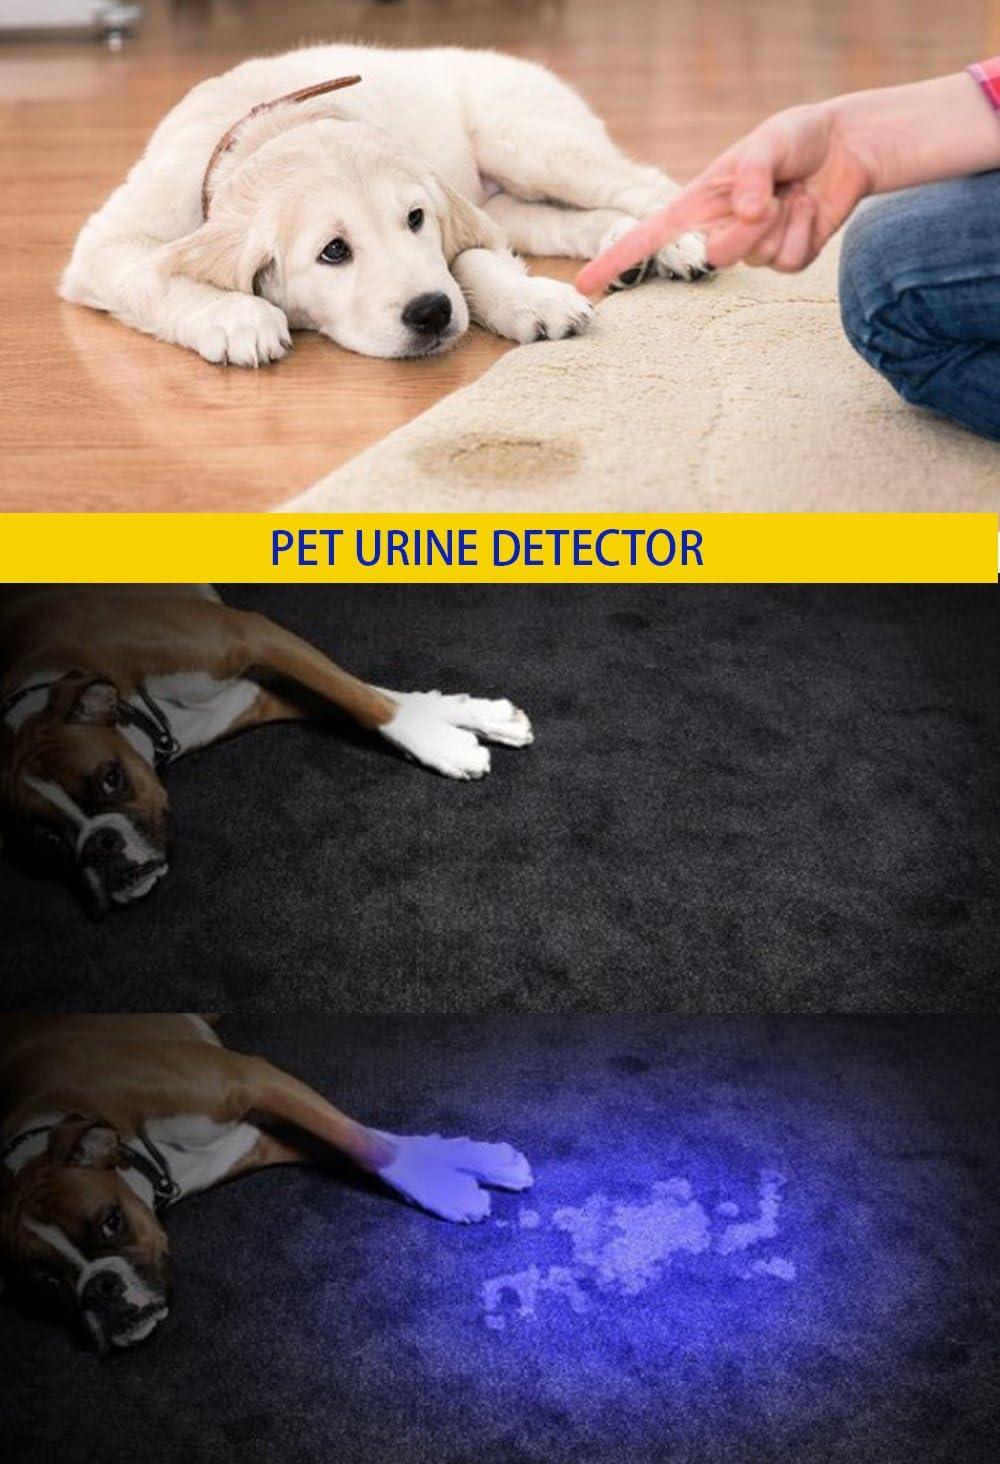 Uv Flashlight With 51 Led Bulbs, Led Torch, Dog/cat Urine Detector, Resin,  Fluorescent